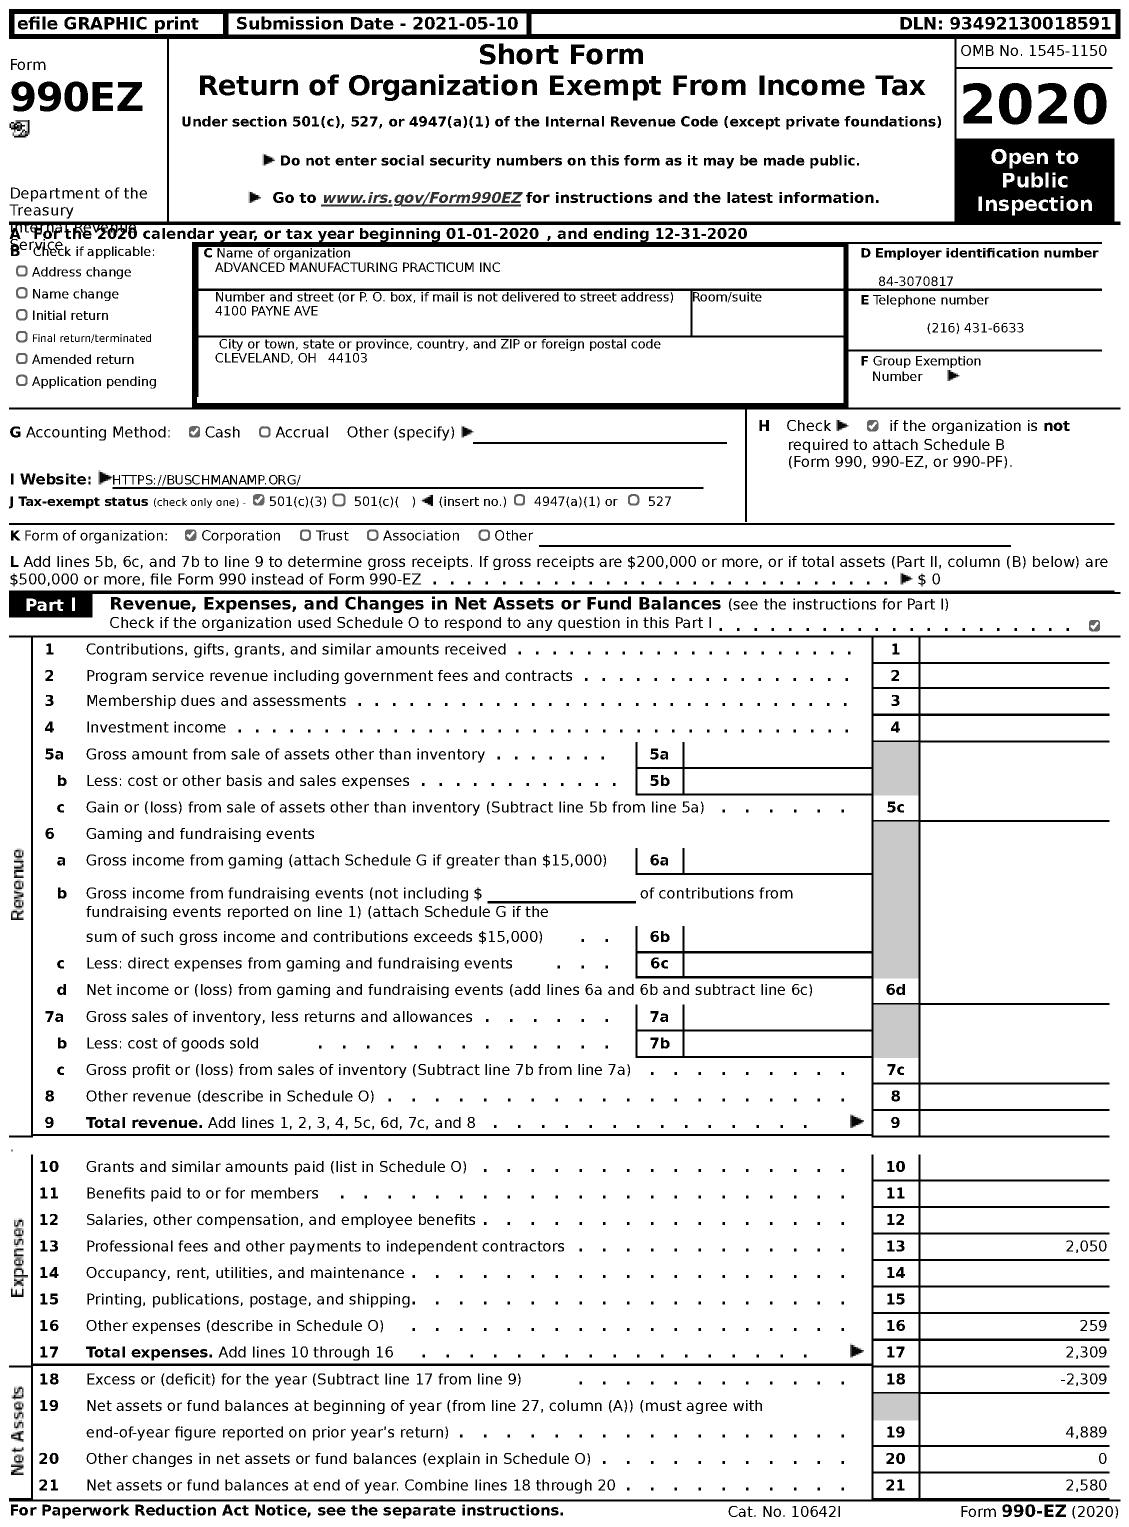 Image of first page of 2020 Form 990EZ for Advanced Manufacturing Practicum